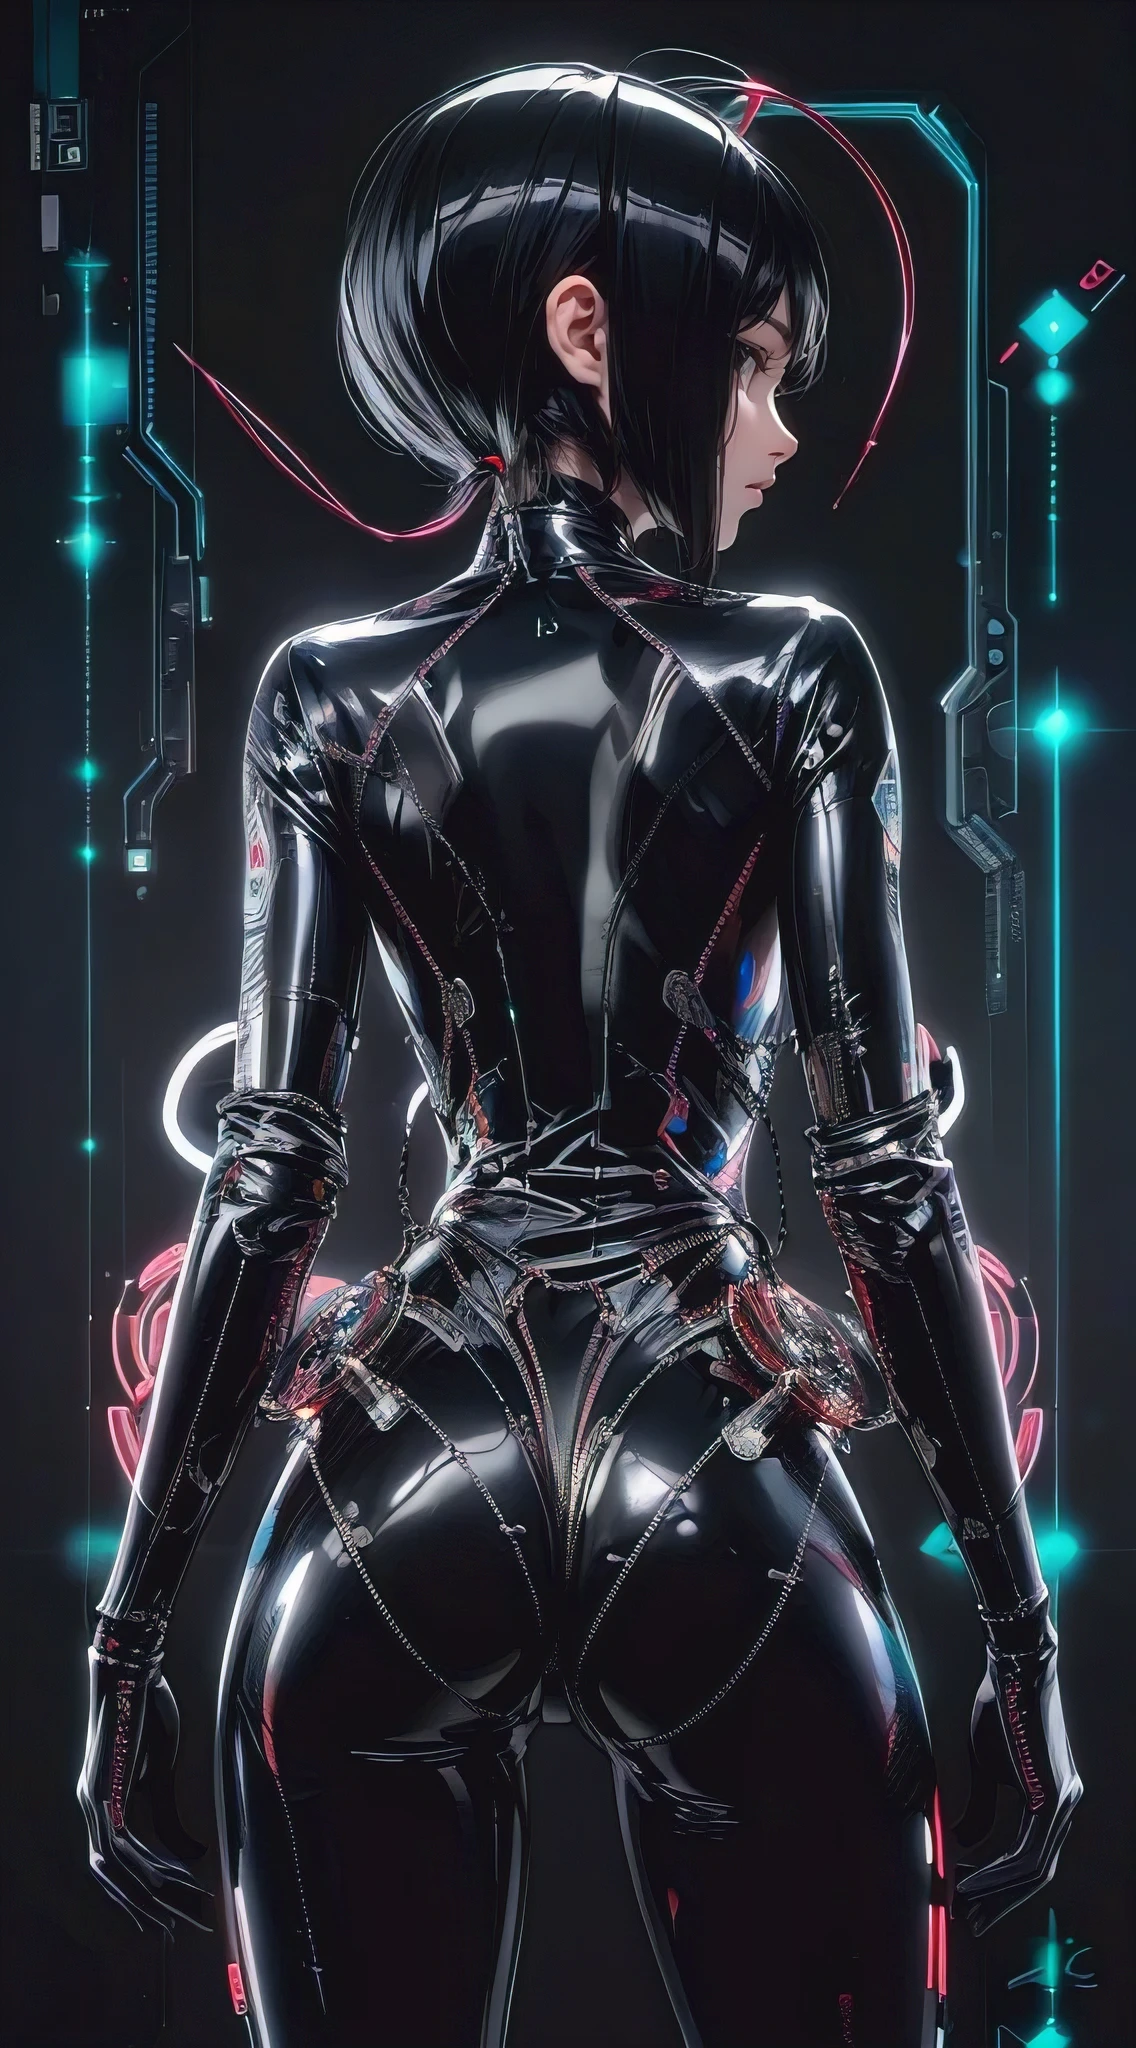 (best quality,4k,8k,highres,masterpiece:1.2),ultra-detailed,(realistic,photorealistic,photo-realistic:1.37), a groundbreaking and visually stunning 3D rendering of a futuristic female figure, the superbly crafted suit is made of ultra-shiny black carbon latex, featuring intricate electronic patterns that accentuate the figure's curves. The suit is adorned with multicolored neon lights and enhanced with electronic circuit details. The overall design seamlessly merges the boundaries between humans and machines, electronics, and cyberpunk influences. The artist's expert use of artificial intelligence brings this captivating and imaginative masterpiece to life, blending illustration, anime, fashion, and portrait photography., illustration, anime, fashion, portrait photography
